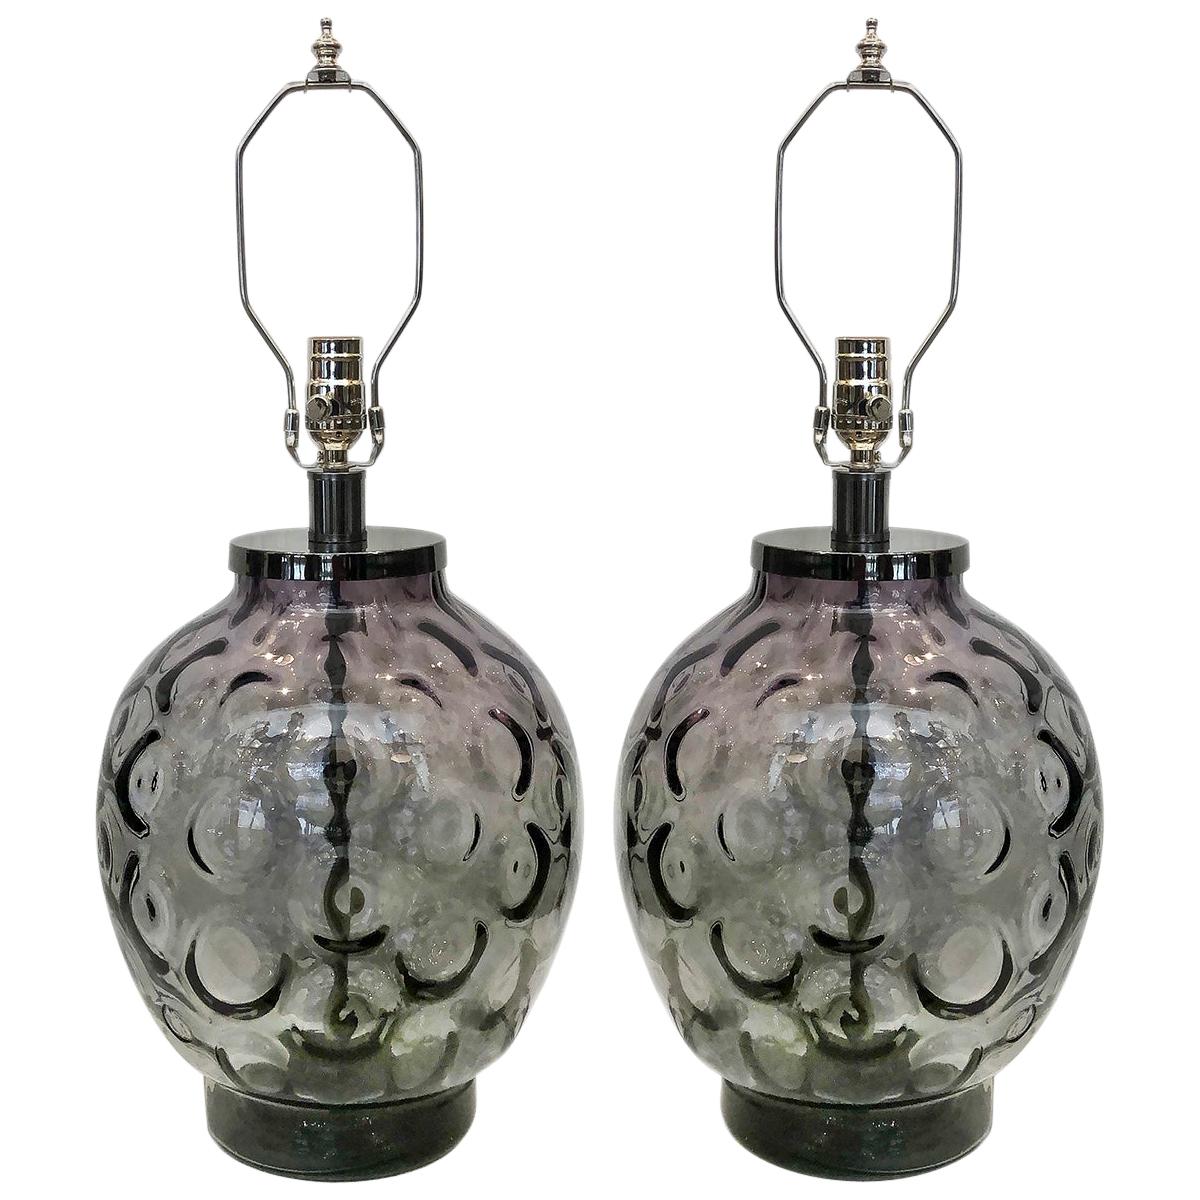 Pair of Midcentury Italian Glass Table Lamps